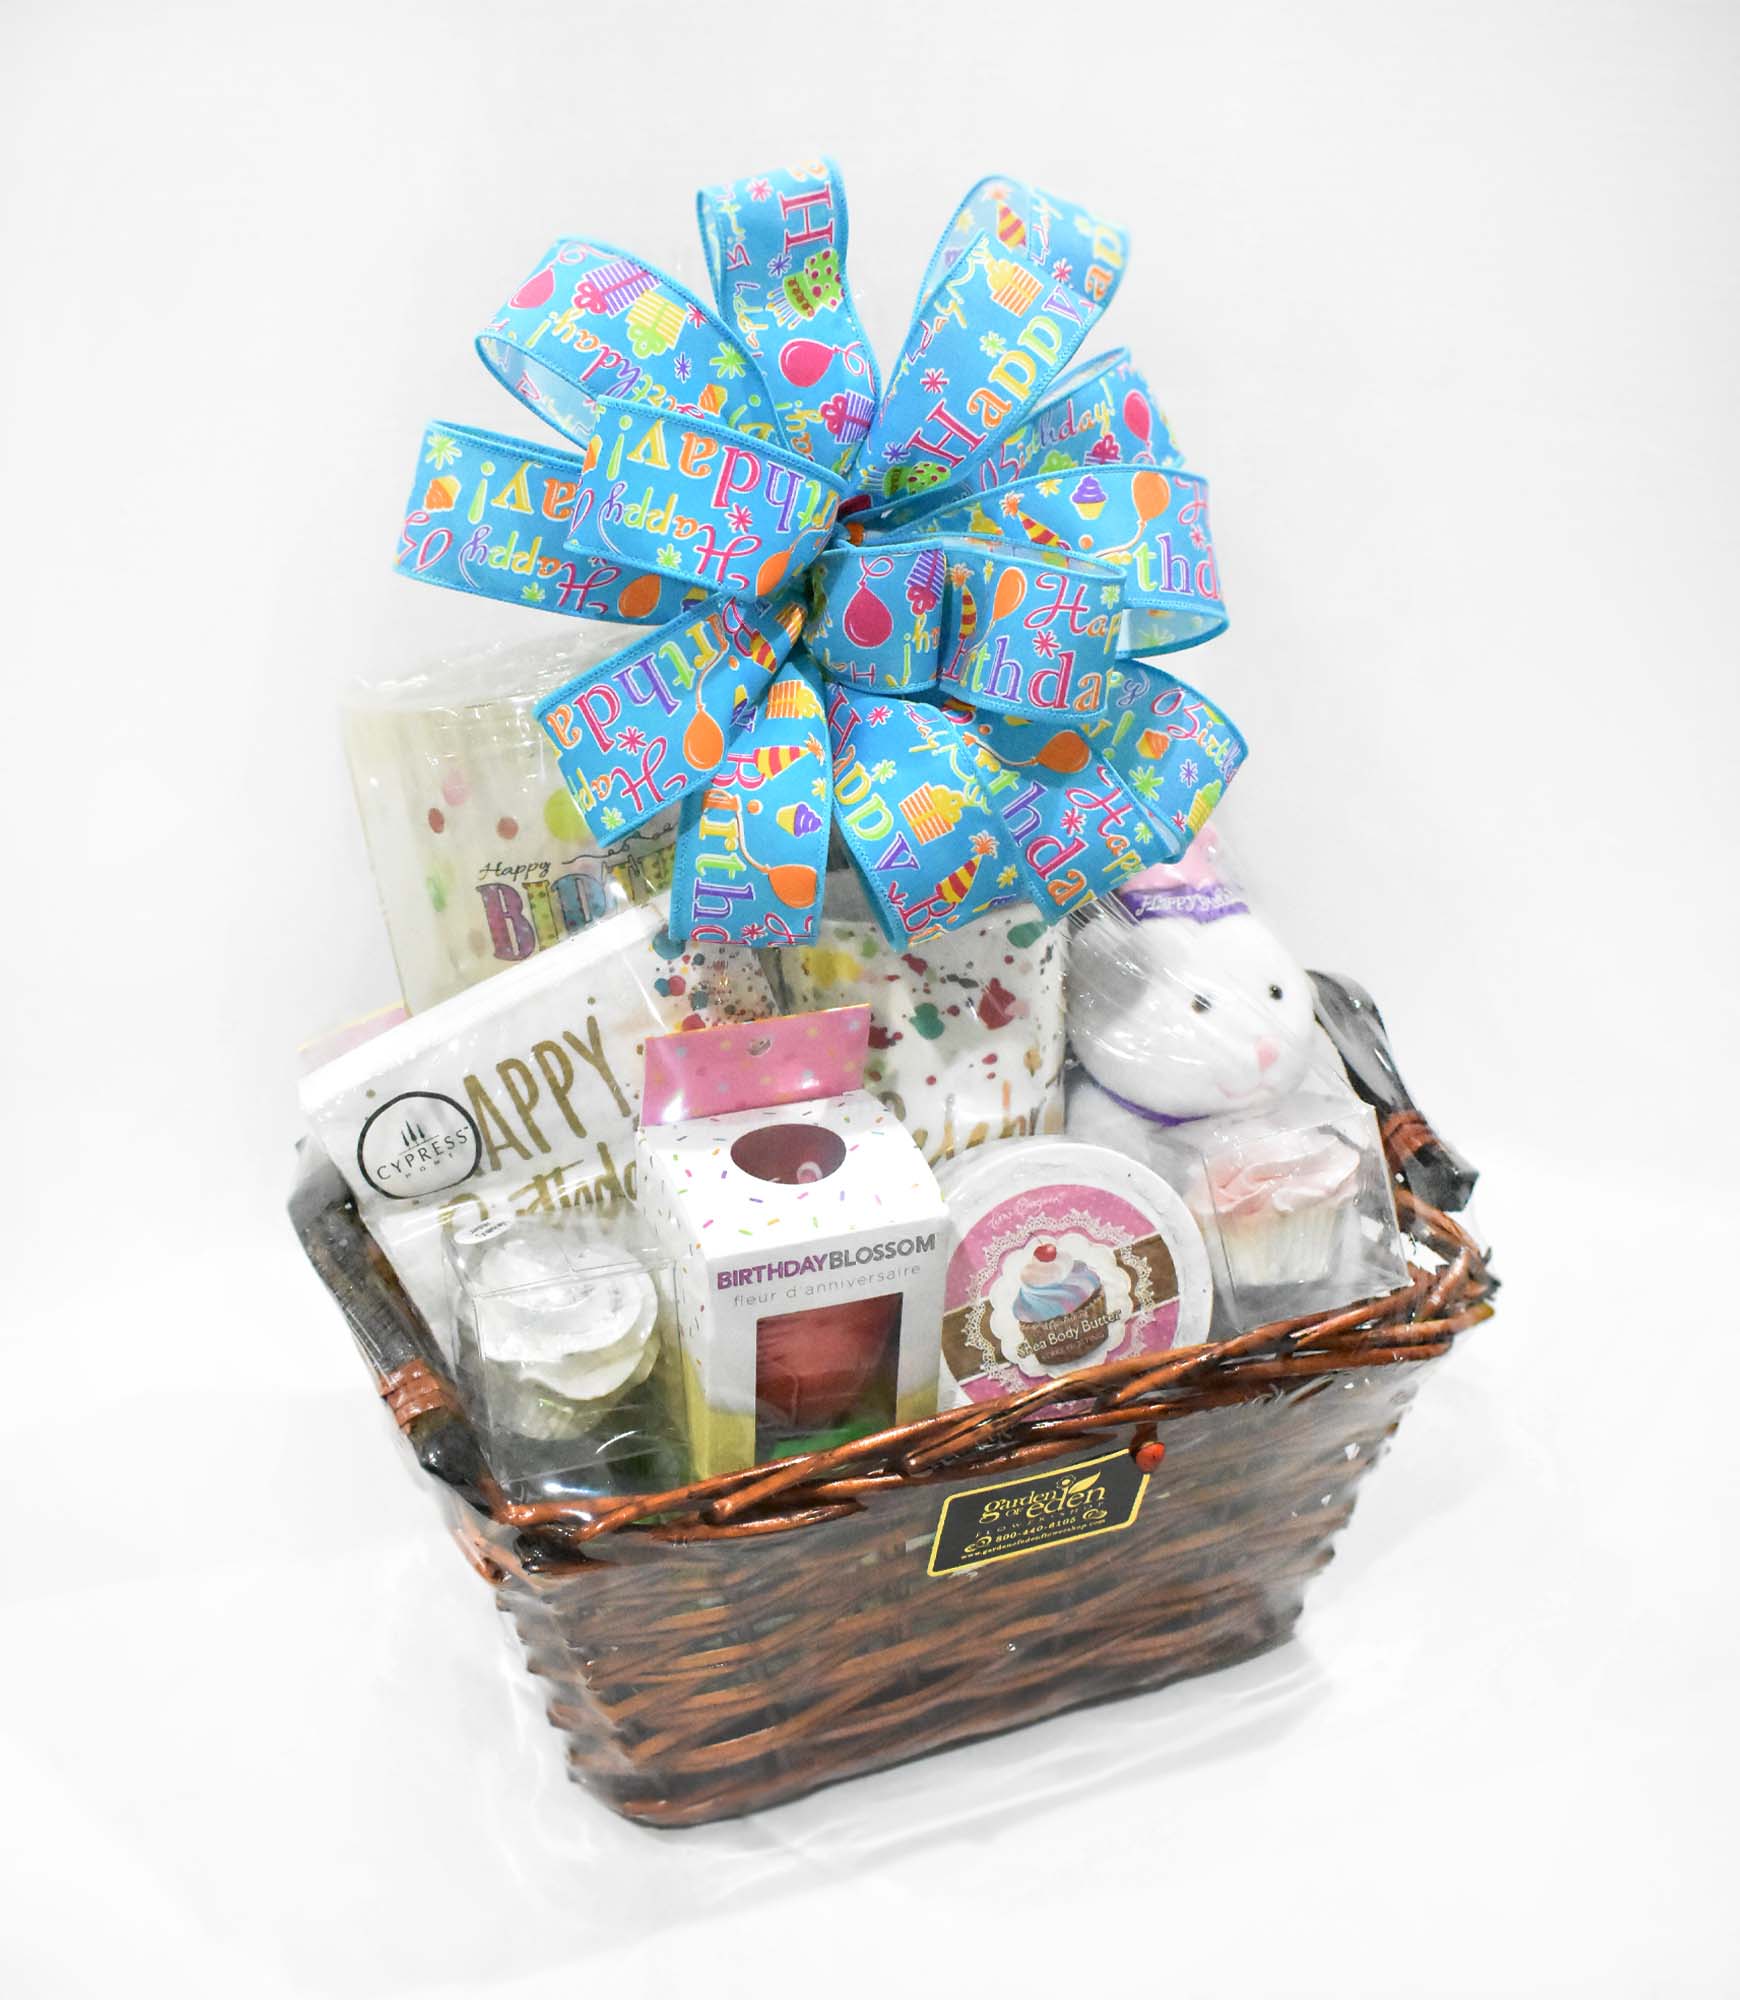 Happy Birthday Gift Basket at Wine Country Gift Baskets